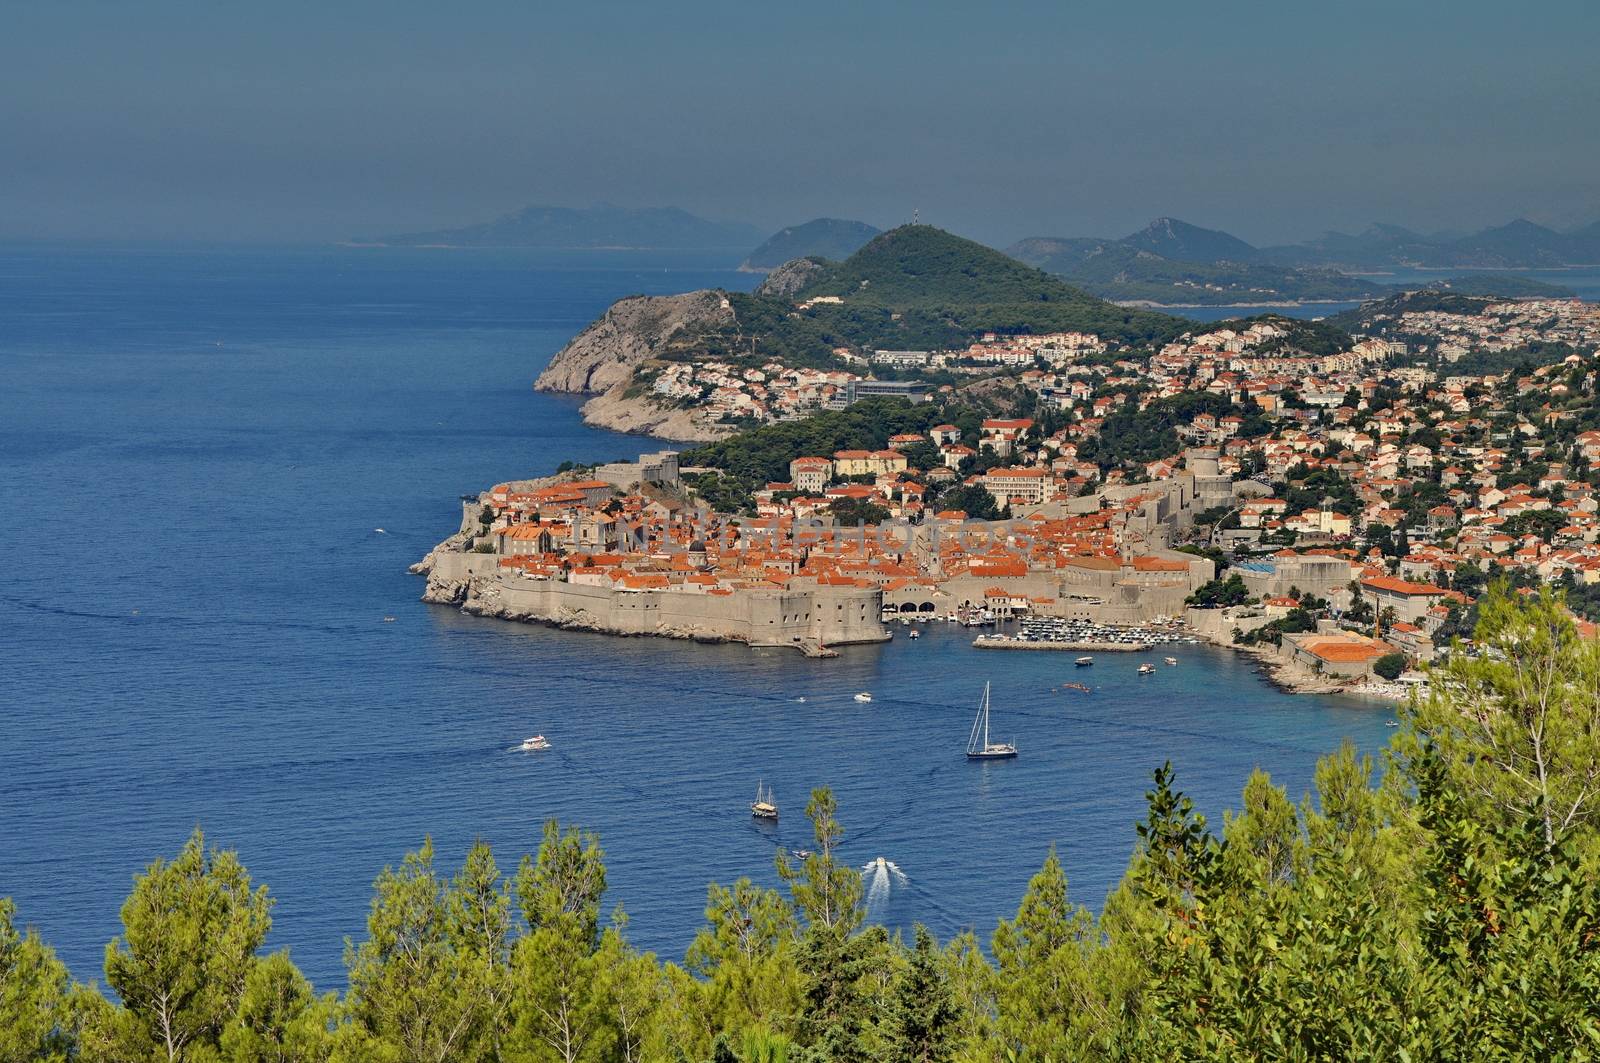 City of Dubrovnik in Croatia from above by anderm